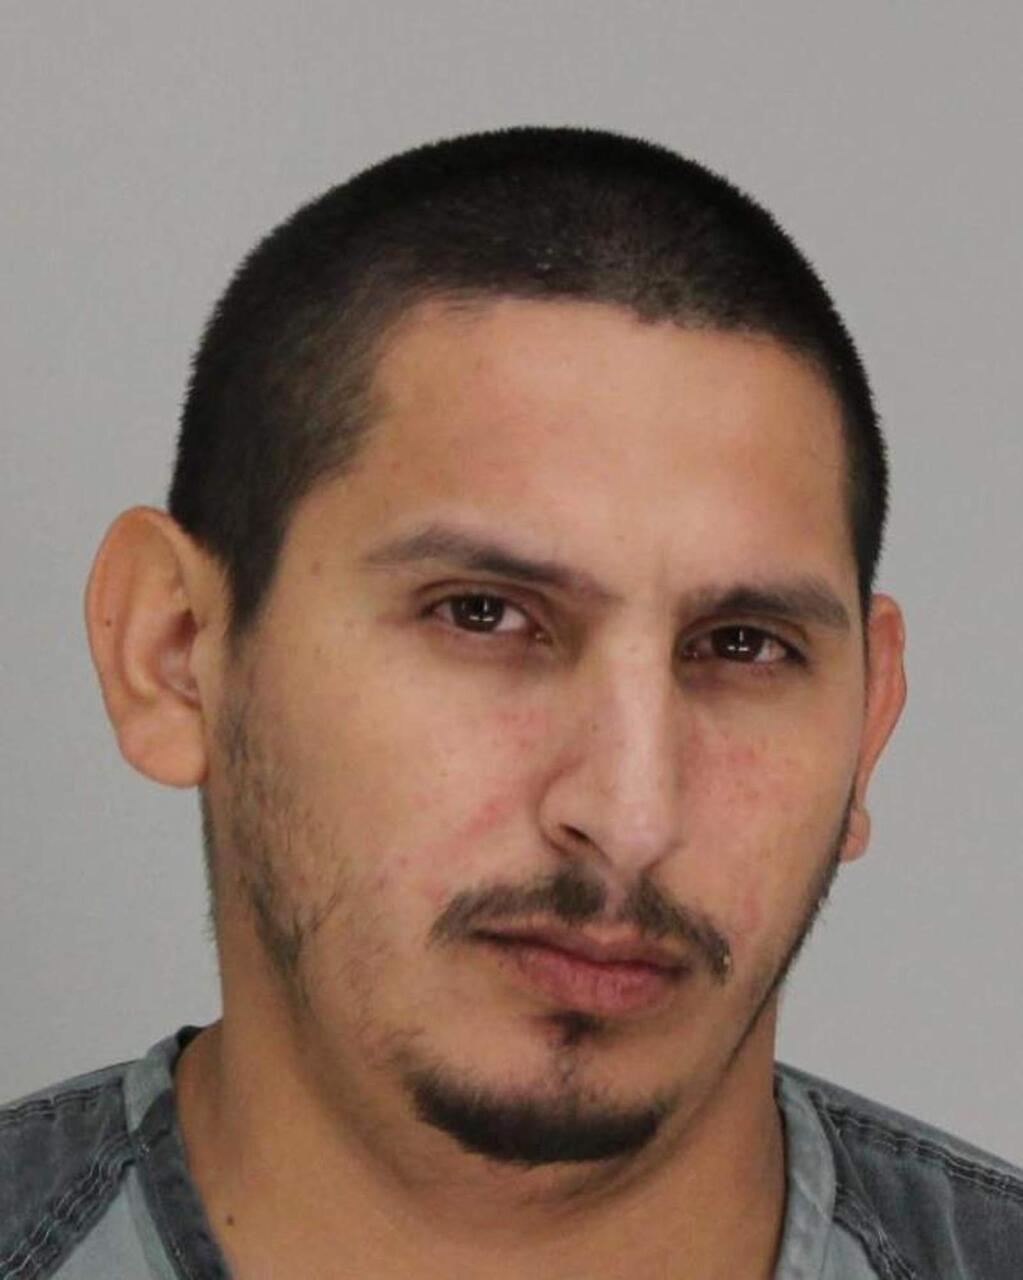 This undated photo provided by the Dallas County Sheriff's Department shows Armando Juarez. Juarez is accused of shooting and critically wounding multiple Dallas police officers and hurting an employee at a Home Depot store as he led law enforcement on a high-speed car chase before he was captured in a late-night arrest Tuesday, April 24, 2018. Police arrested Juarez on charges of aggravated assault on a public servant and felony theft. (Dallas County Sheriff's Department via AP)